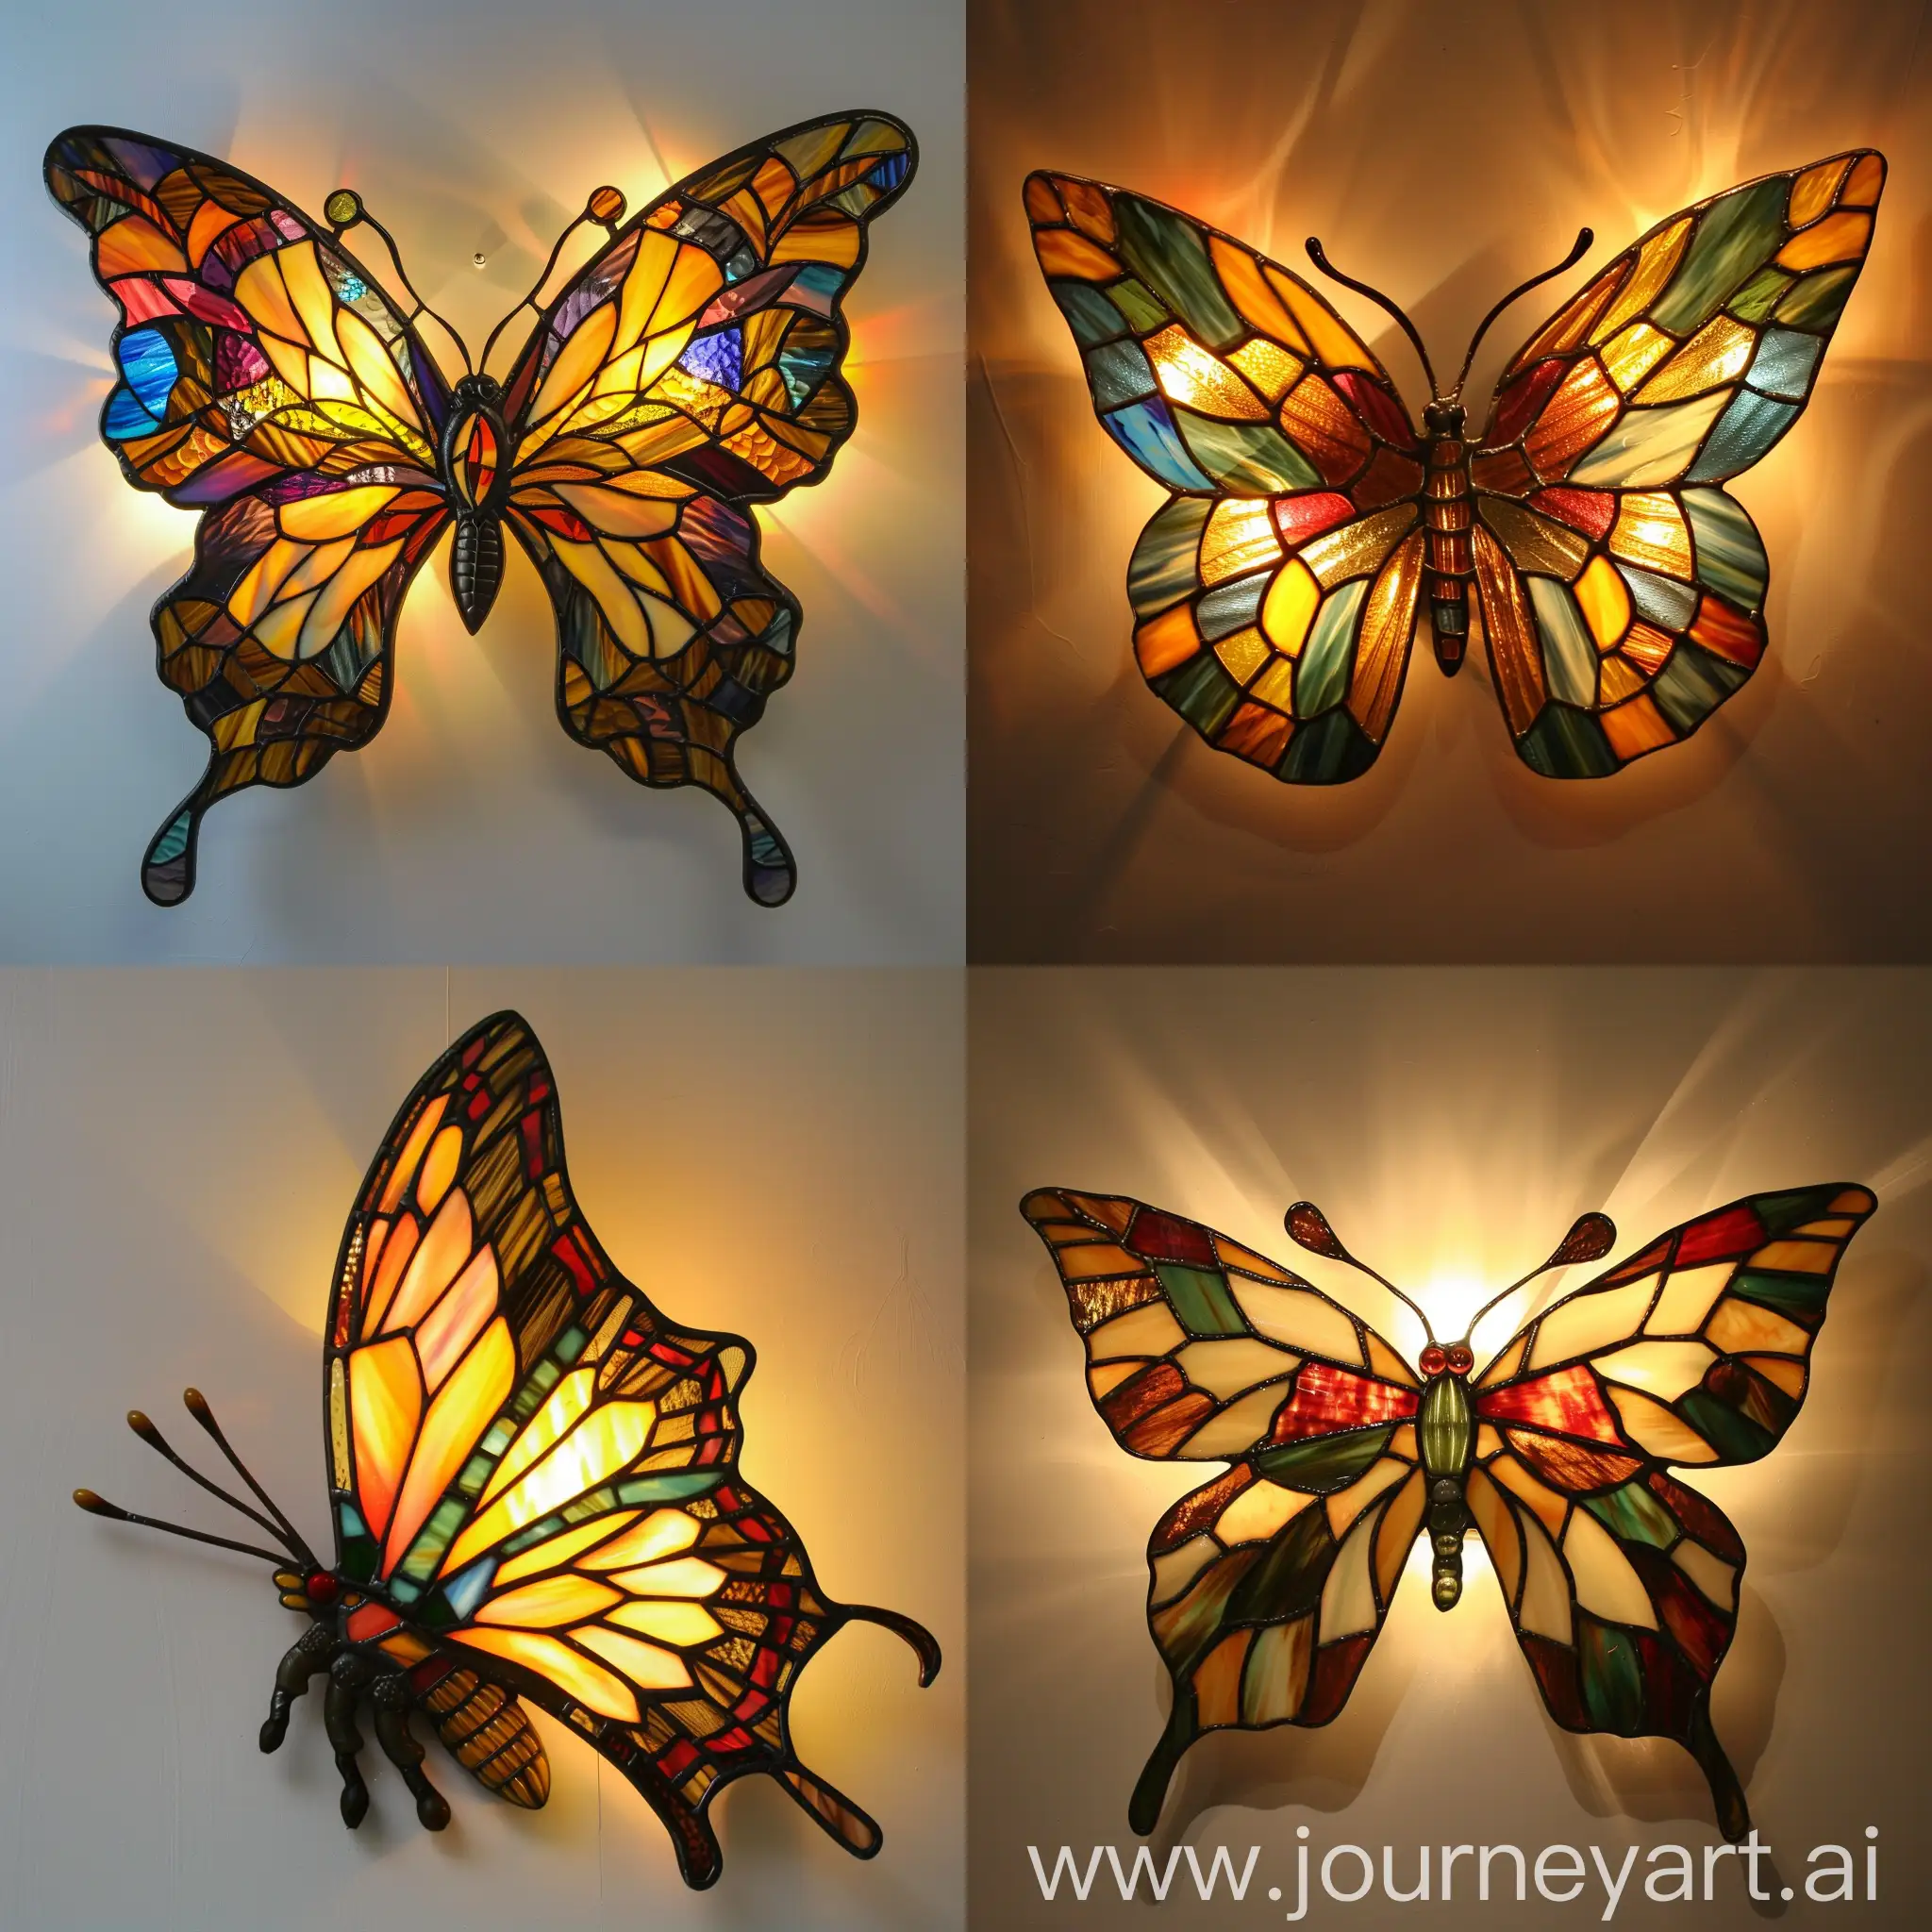 Stained-Glass-Butterfly-Wall-Lamp-Exquisite-Design-Illuminating-Spaces